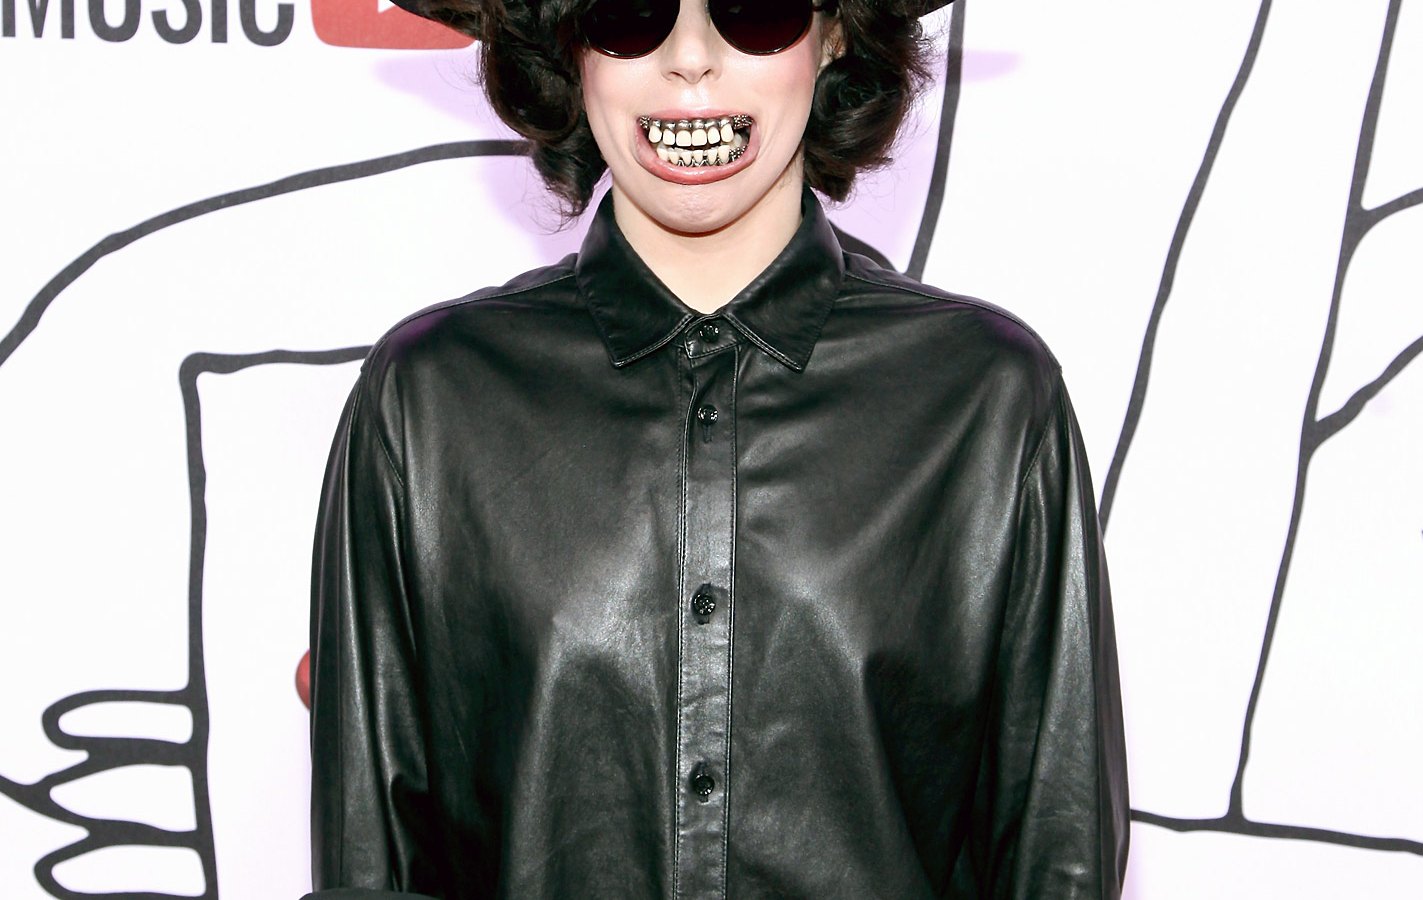 Lady Gaga attends the YouTube Music Awards 2013 on Nov. 3 in NYC